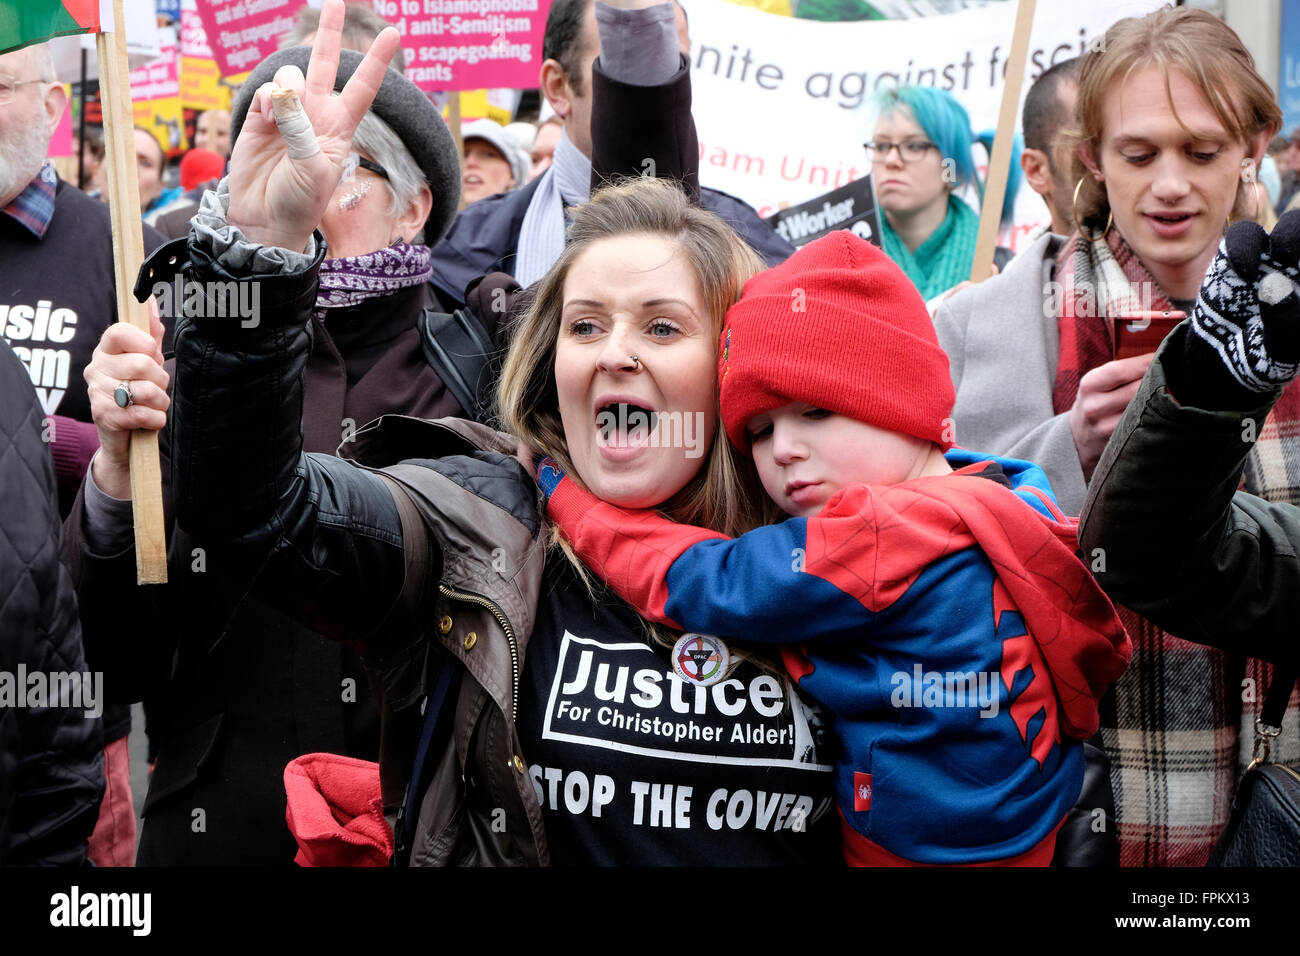 A woman with a child shouts slogans during a demonstration against racism Stock Photo